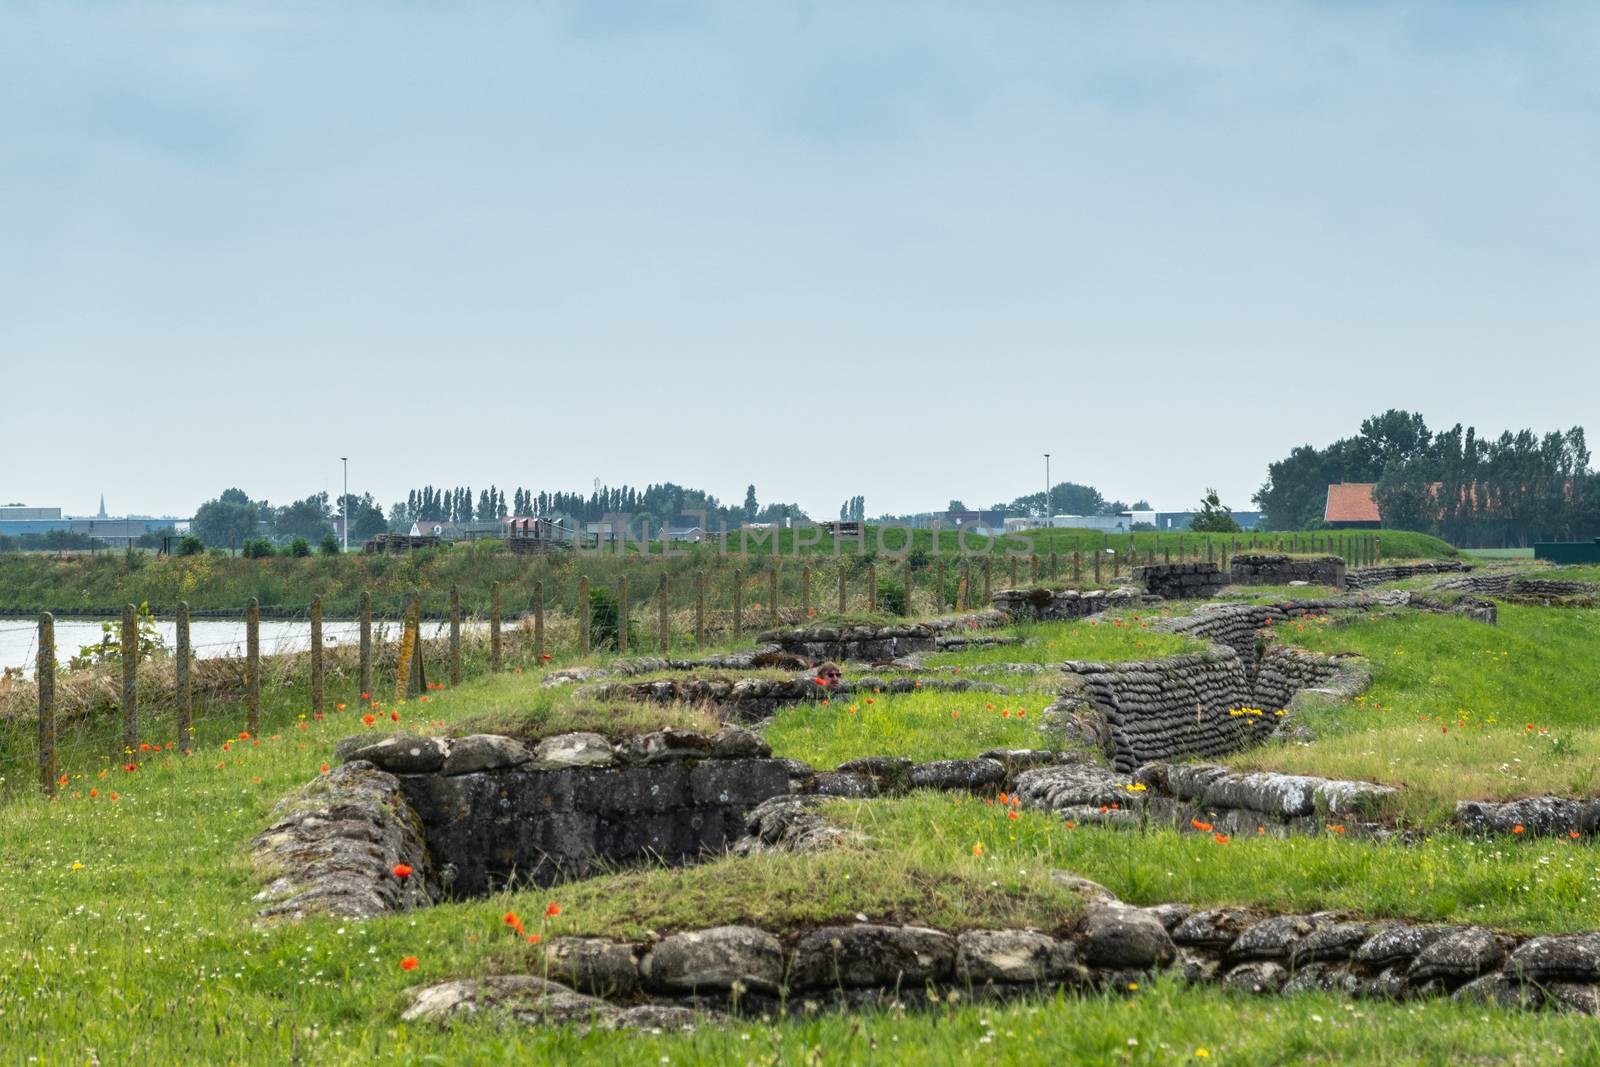 Diksmuide, Flanders, Belgium -  June 19, 2019: Overview of Historic WW1 Trenches, called Dodengang along IJzer River, shows gray-brown stone-hard sandbags, green grass, red poppies. Barbed wire fence and river under blue sky.